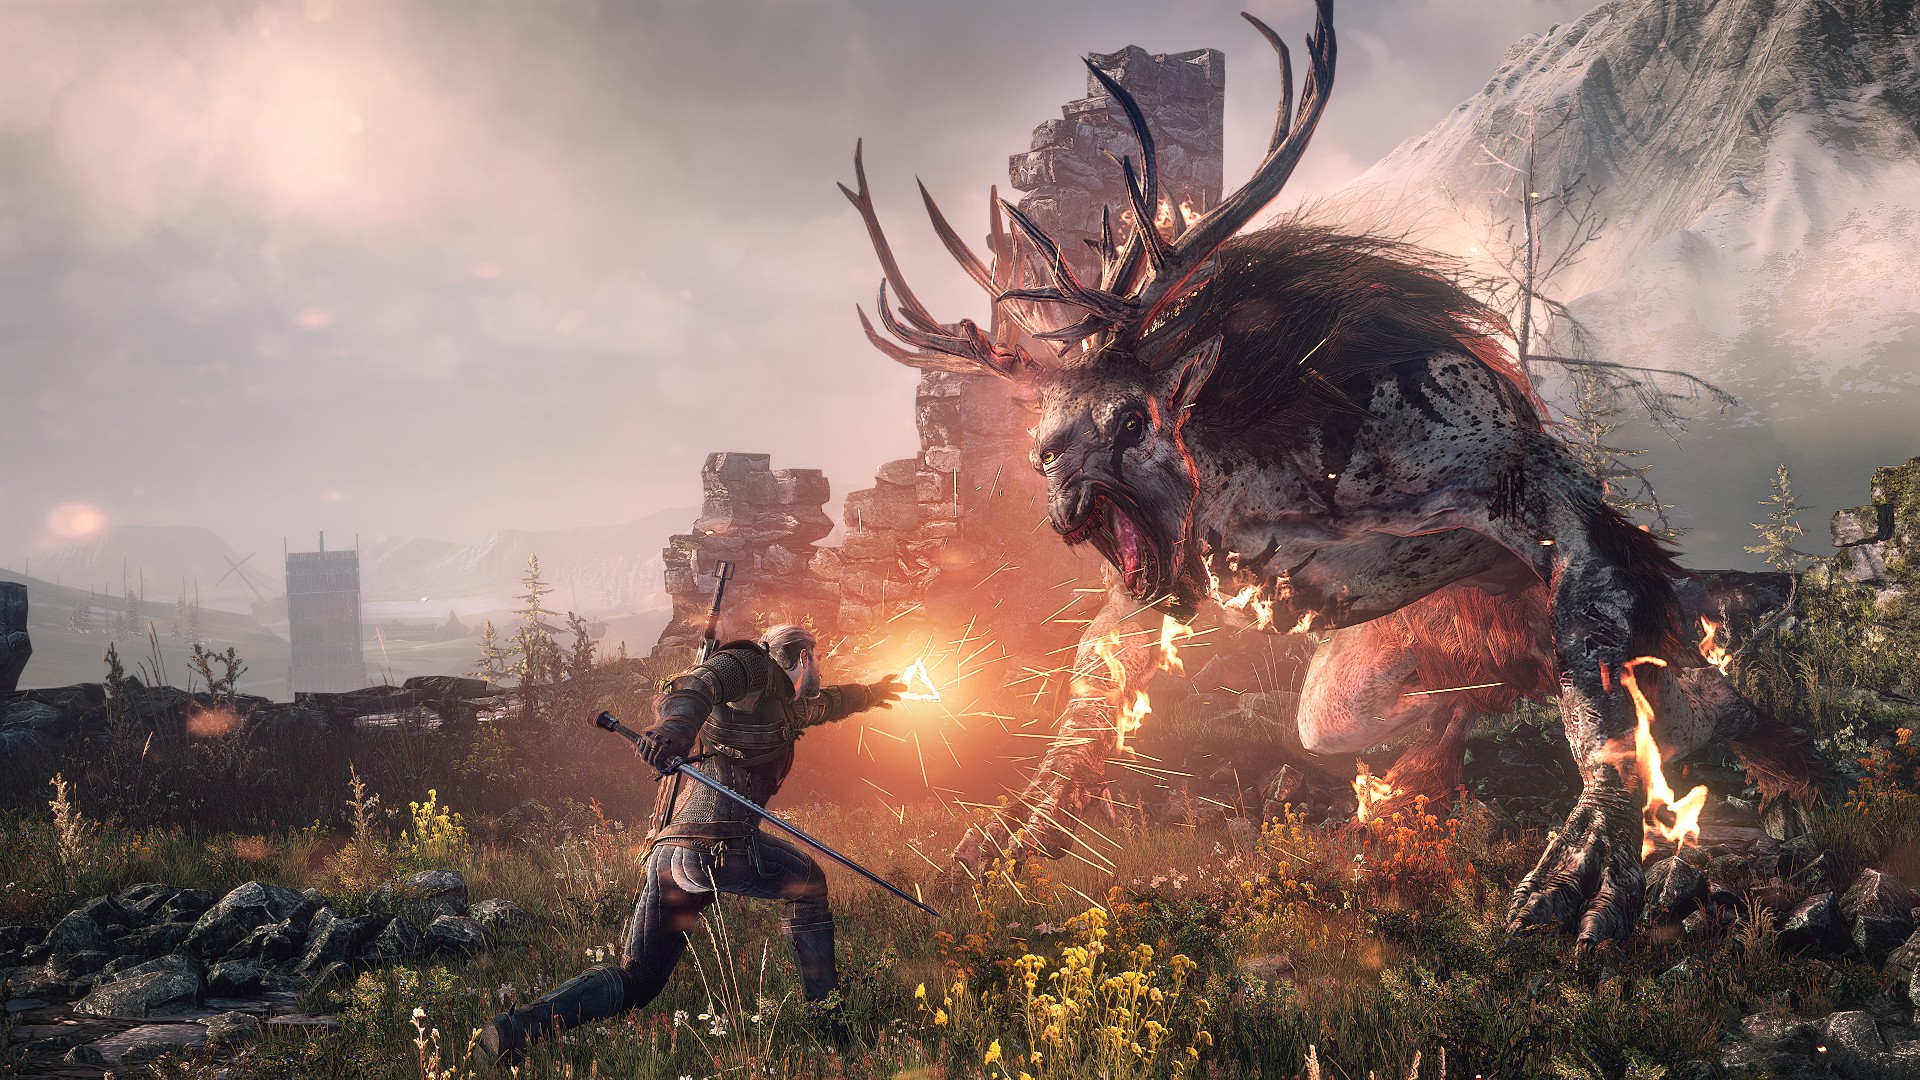 the-witcher-3-wild-hunt-ps4-ps4-36284.jpg